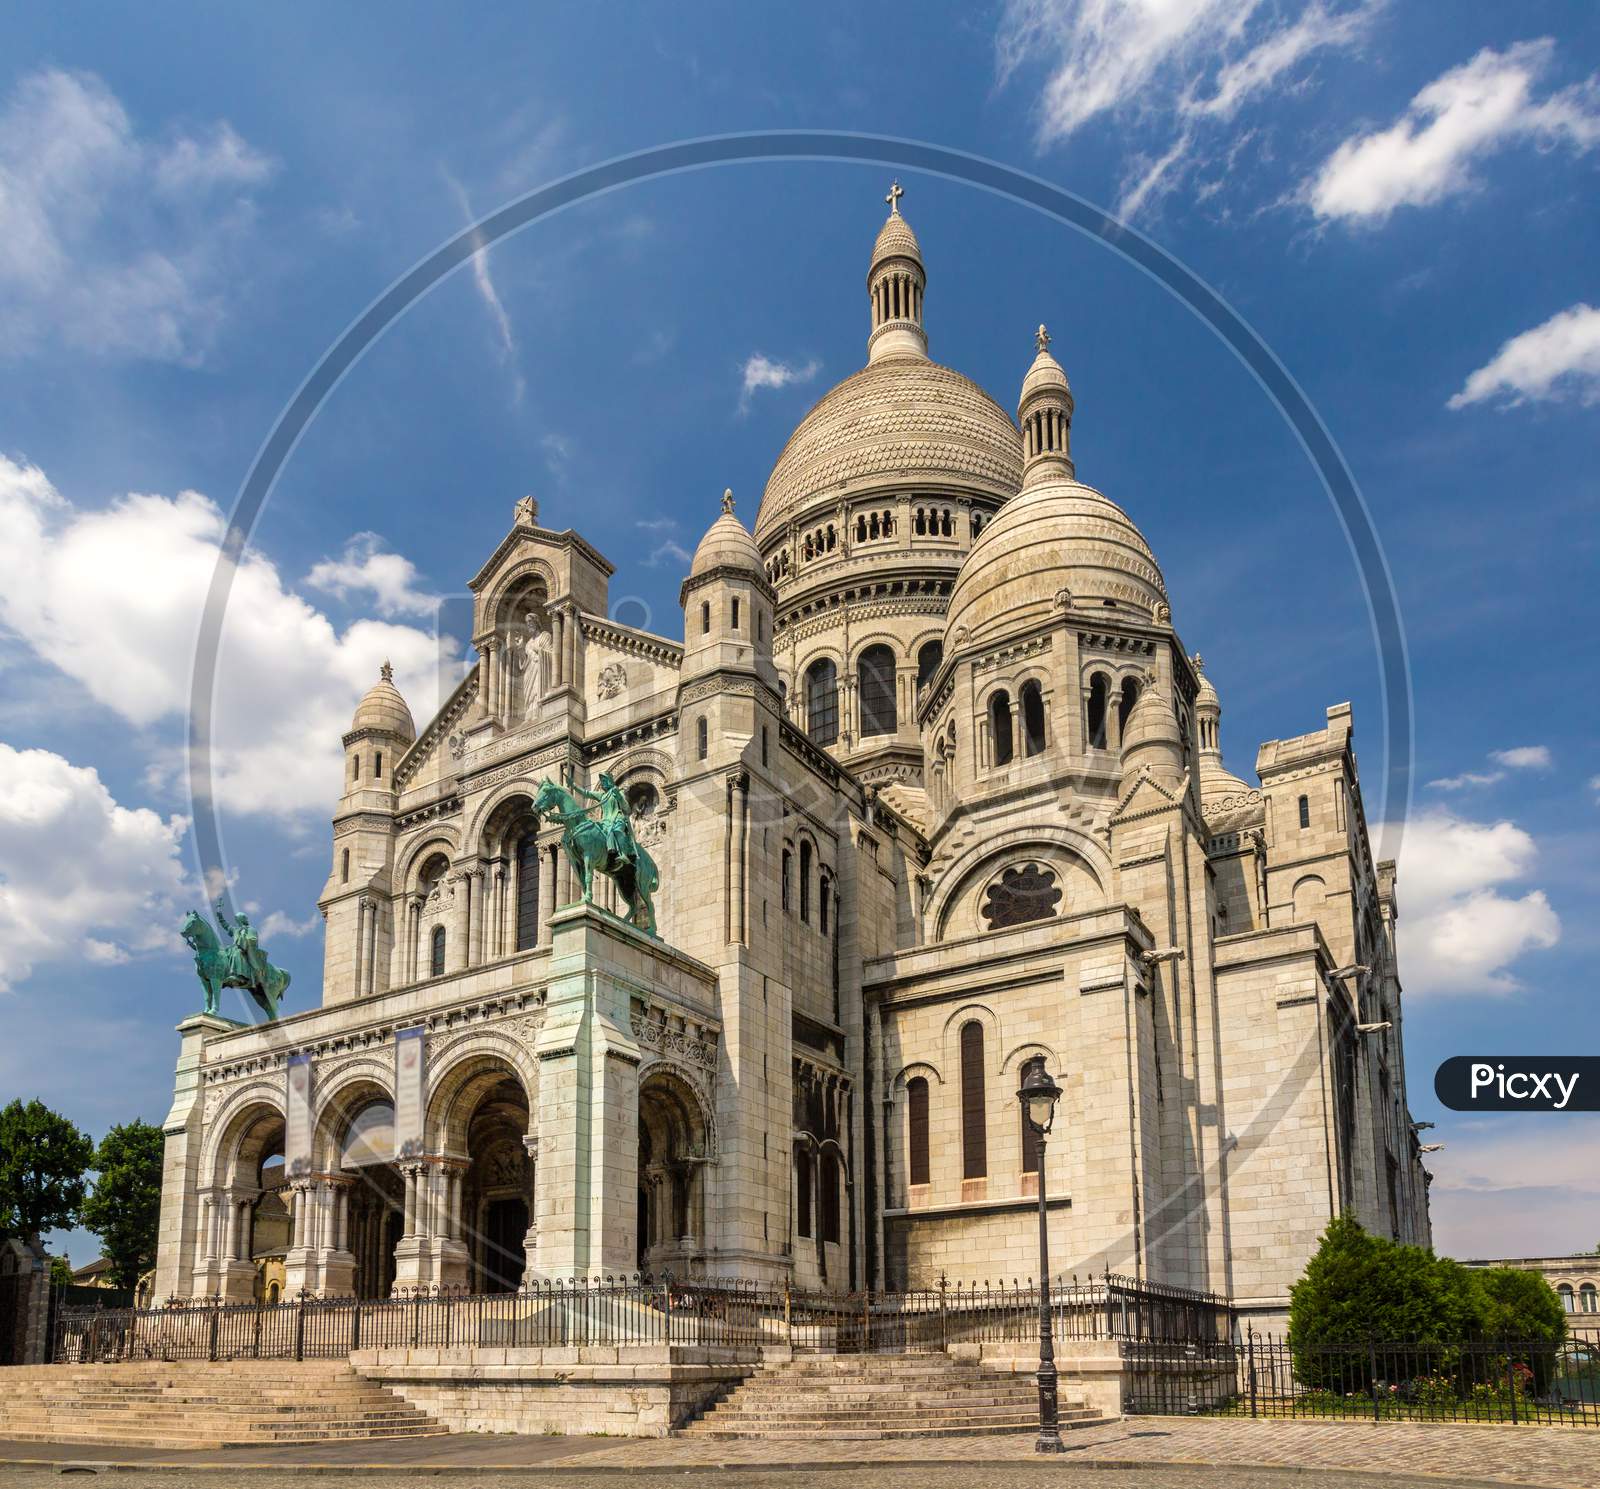 The Basilica Of The Sacred Heart Of Paris - France